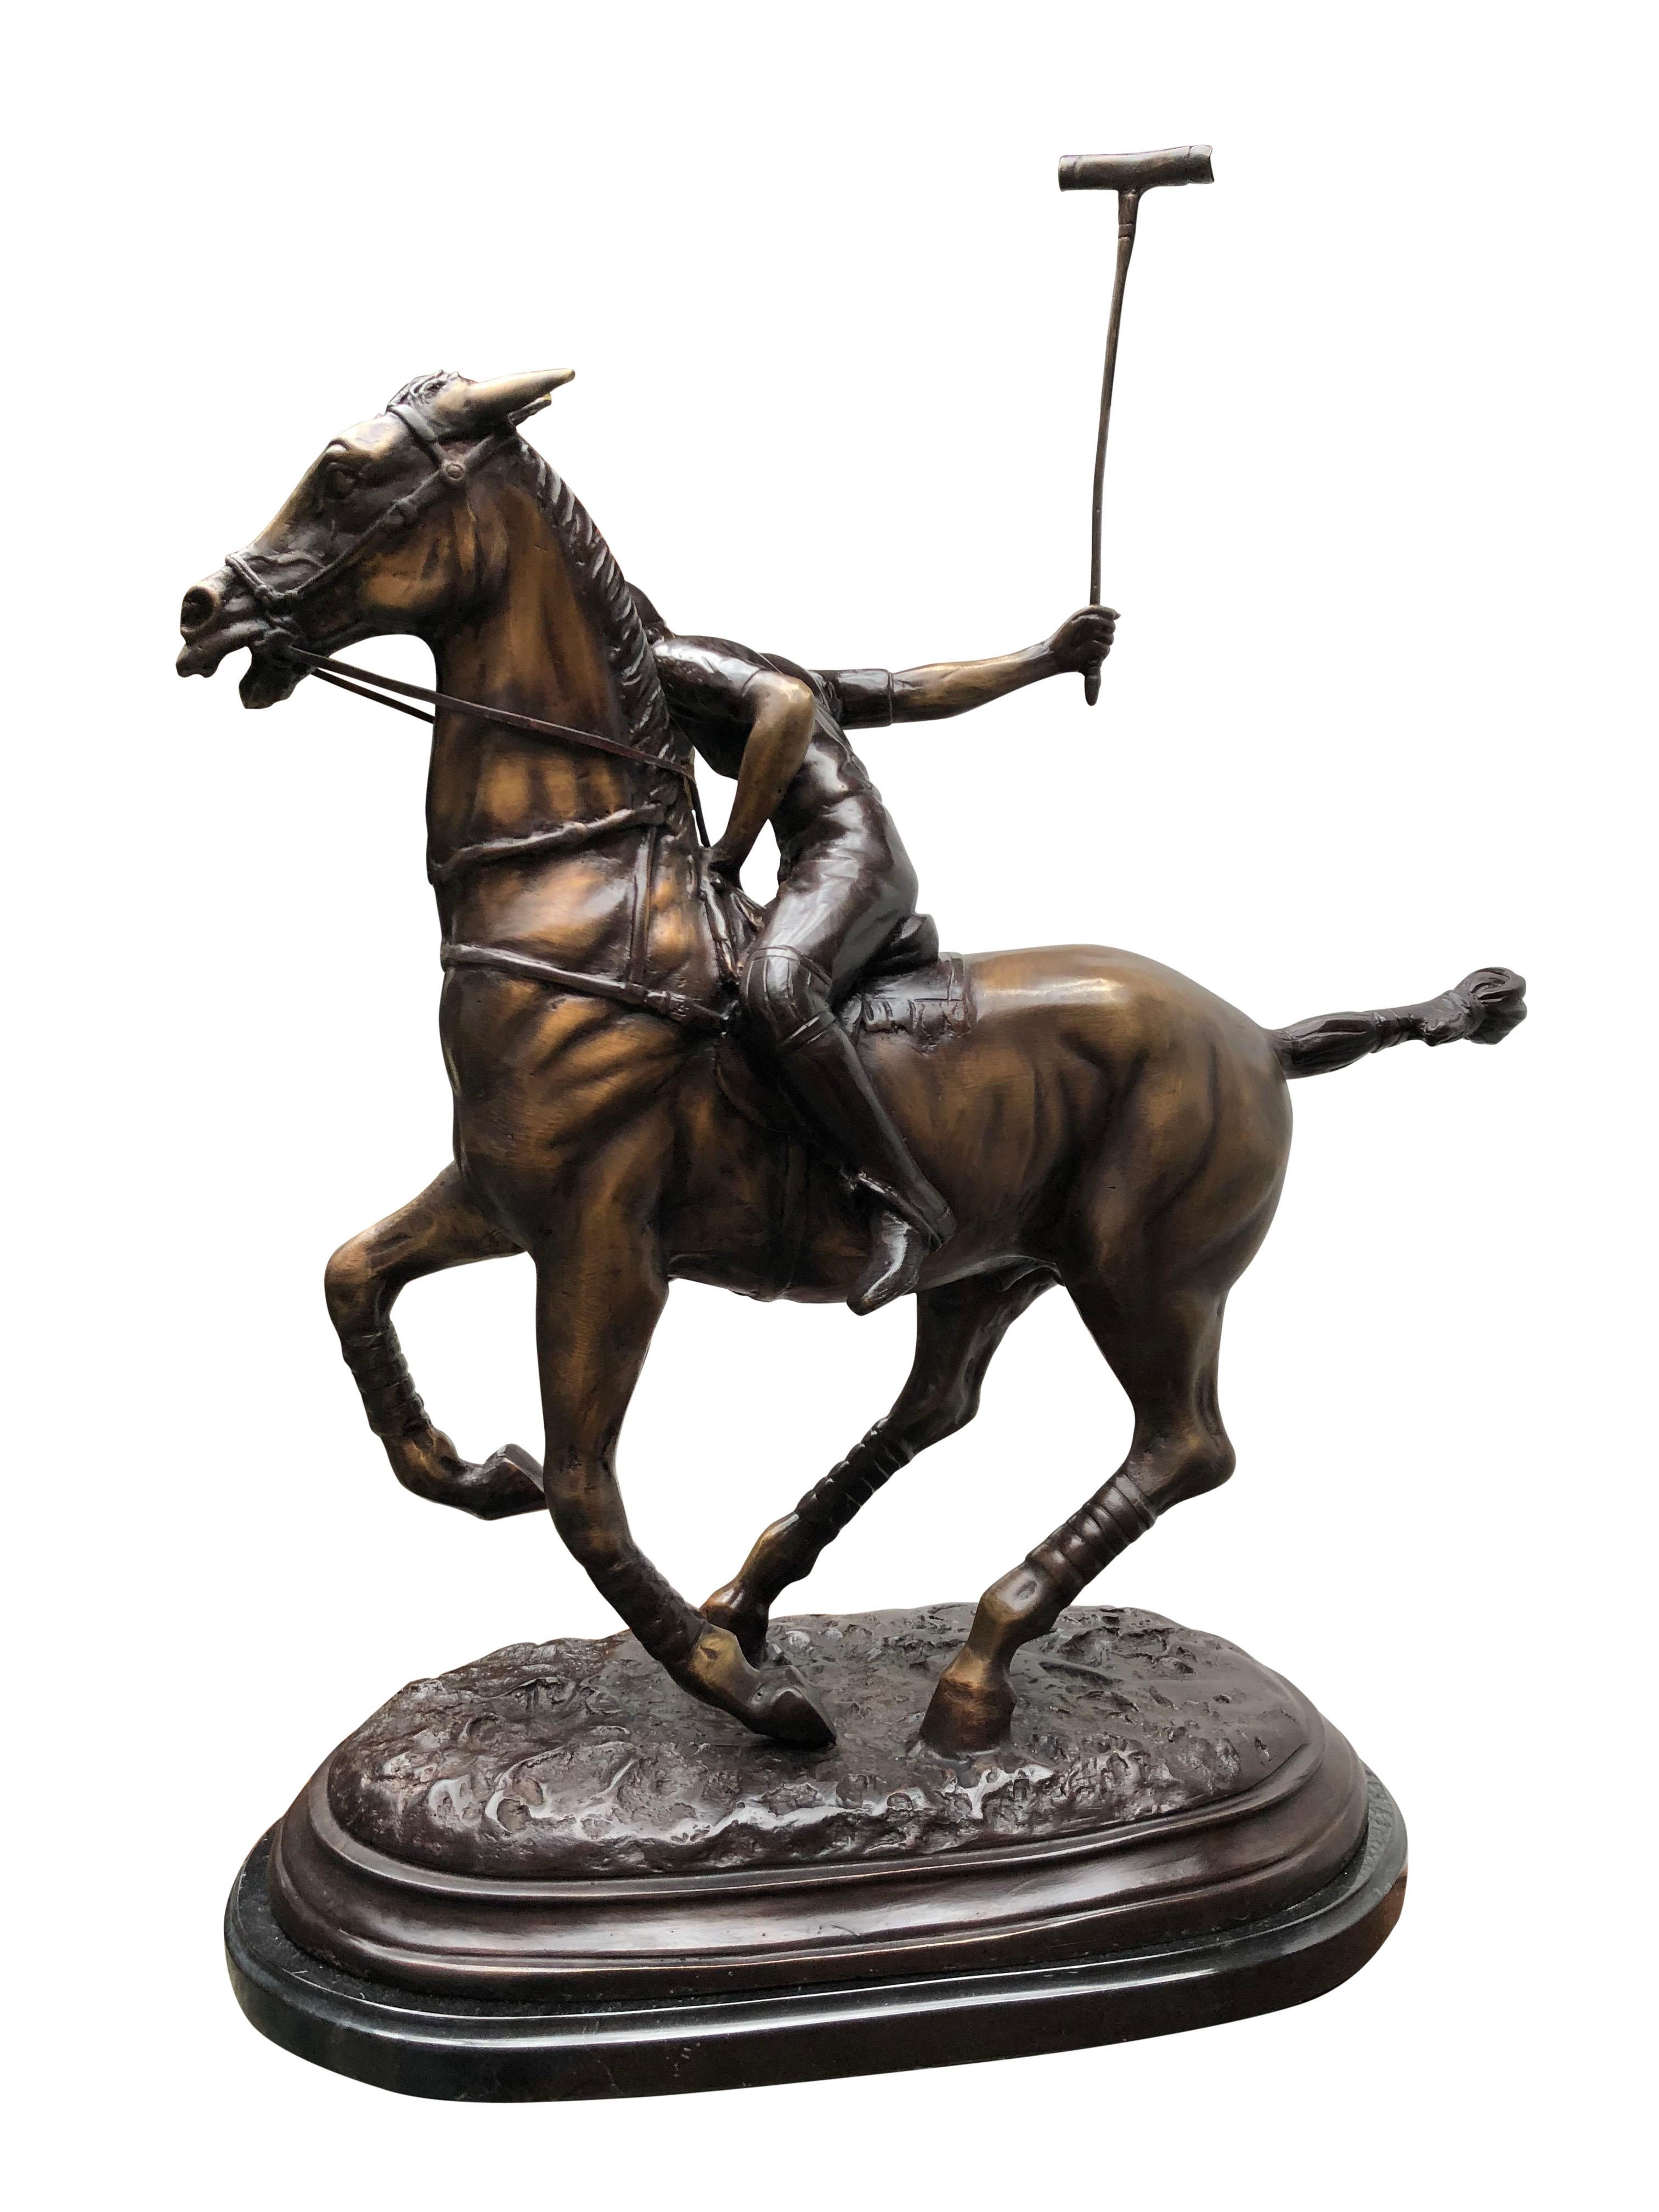 A stunning English bronze casting of a polo player in full swing. Artist has really captured the energy and athleticism of the scene with great skill. Patina to the bronze is superb with various brown hues. Piece sits on a black marble base which is